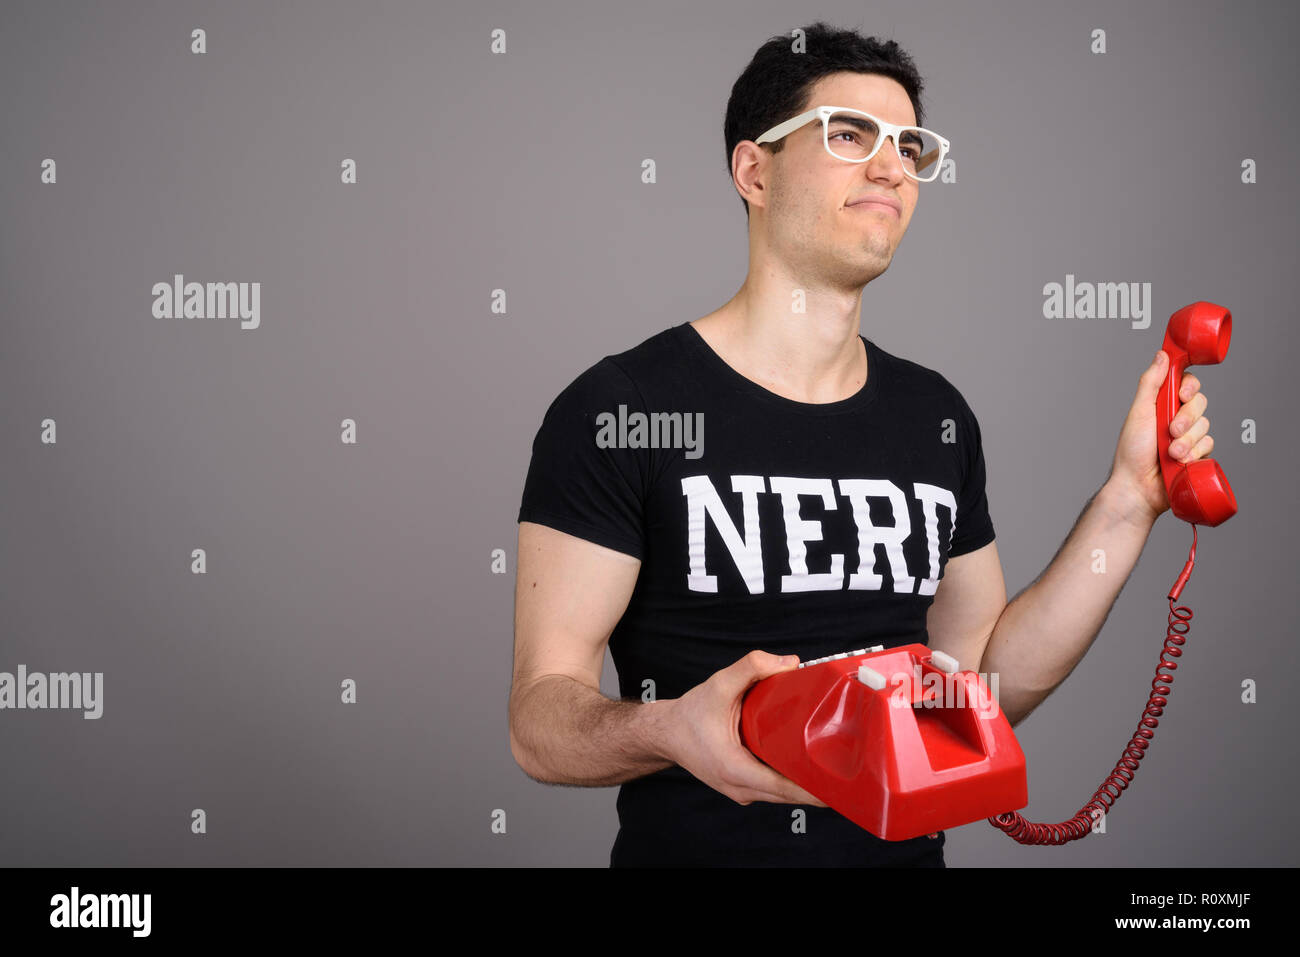 Young handsome nerd man with eyeglasses against gray background Stock Photo